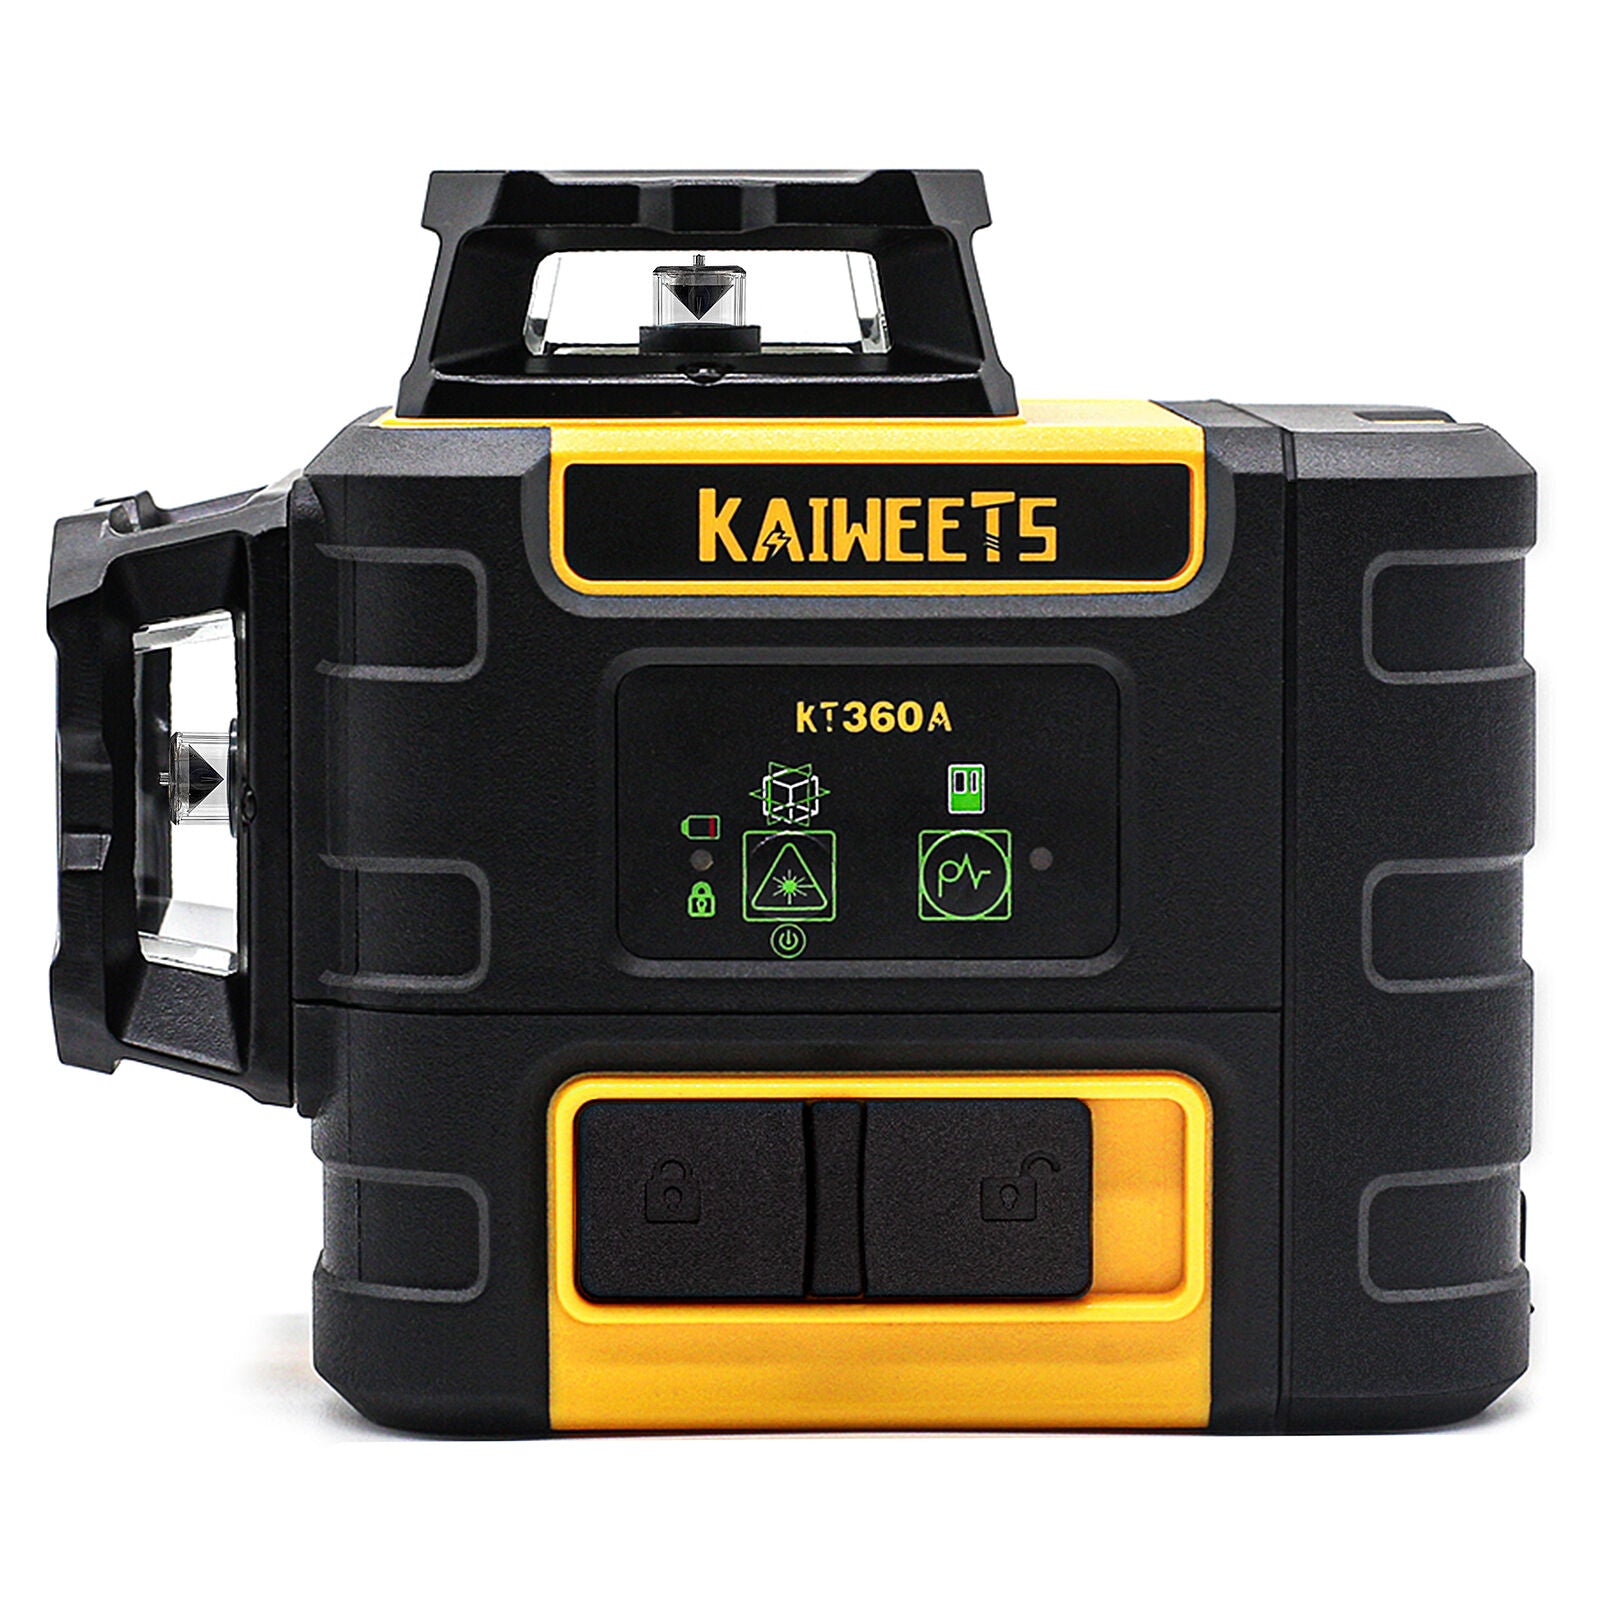 KT360A Green Laser Level 3 X 360° Rotary Self Leveling with 1 Rechargeable Battery